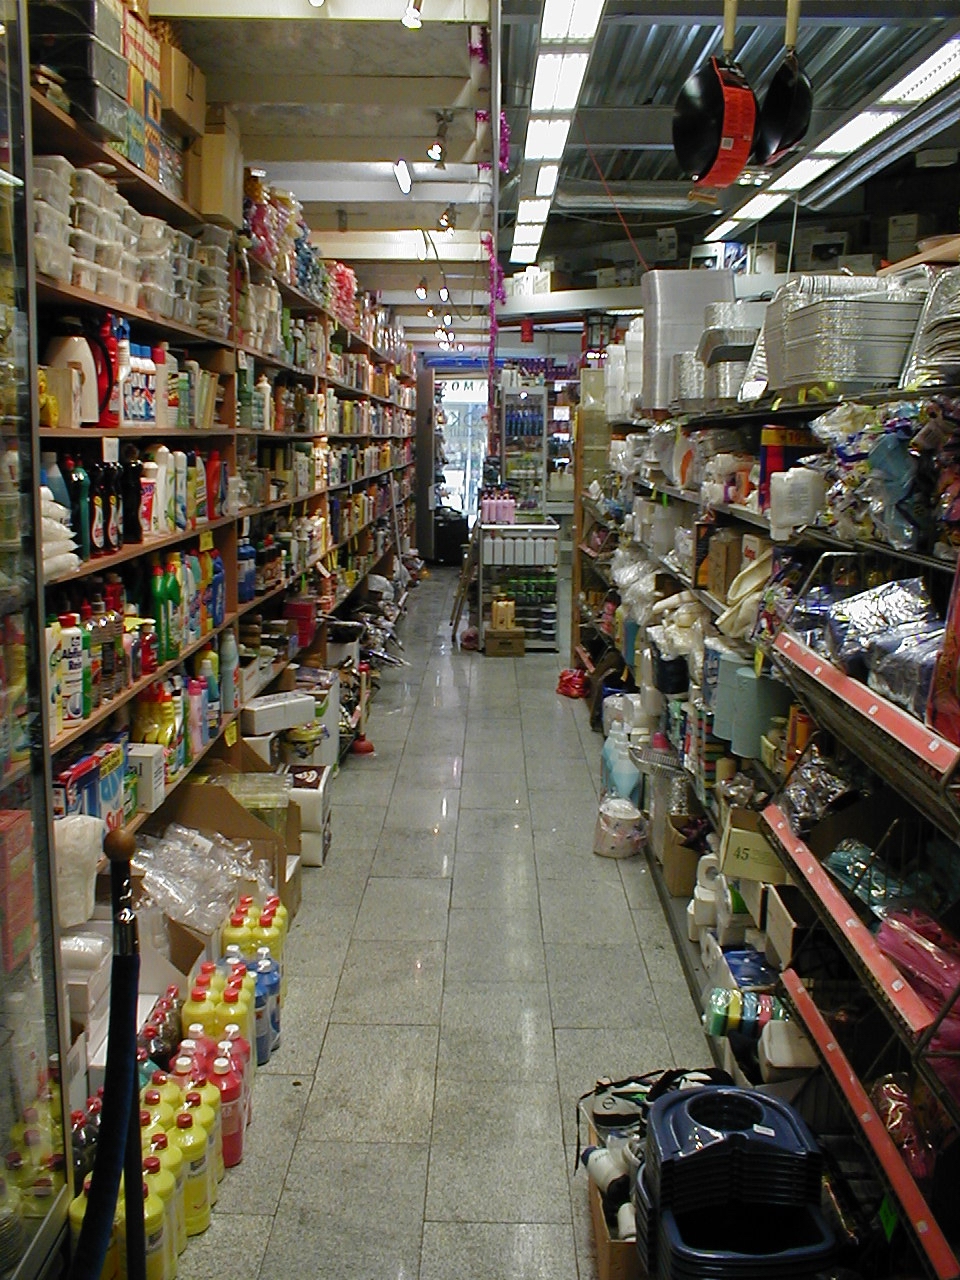 dario messy store shop shelves products